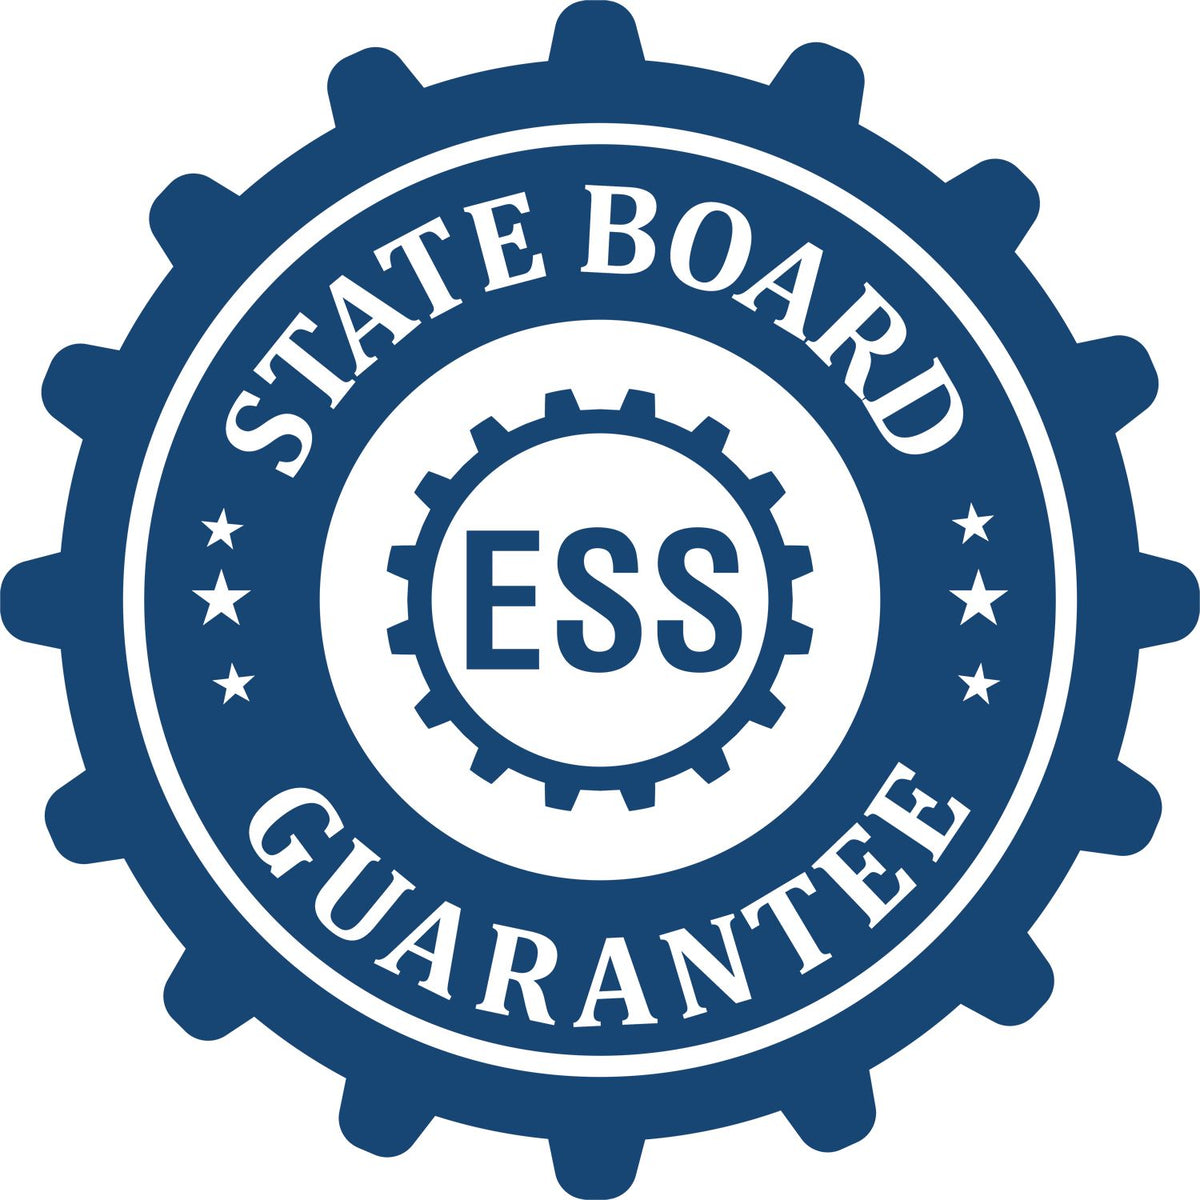 An emblem in a gear shape illustrating a state board guarantee for the Long Reach Colorado Land Surveyor Seal product.